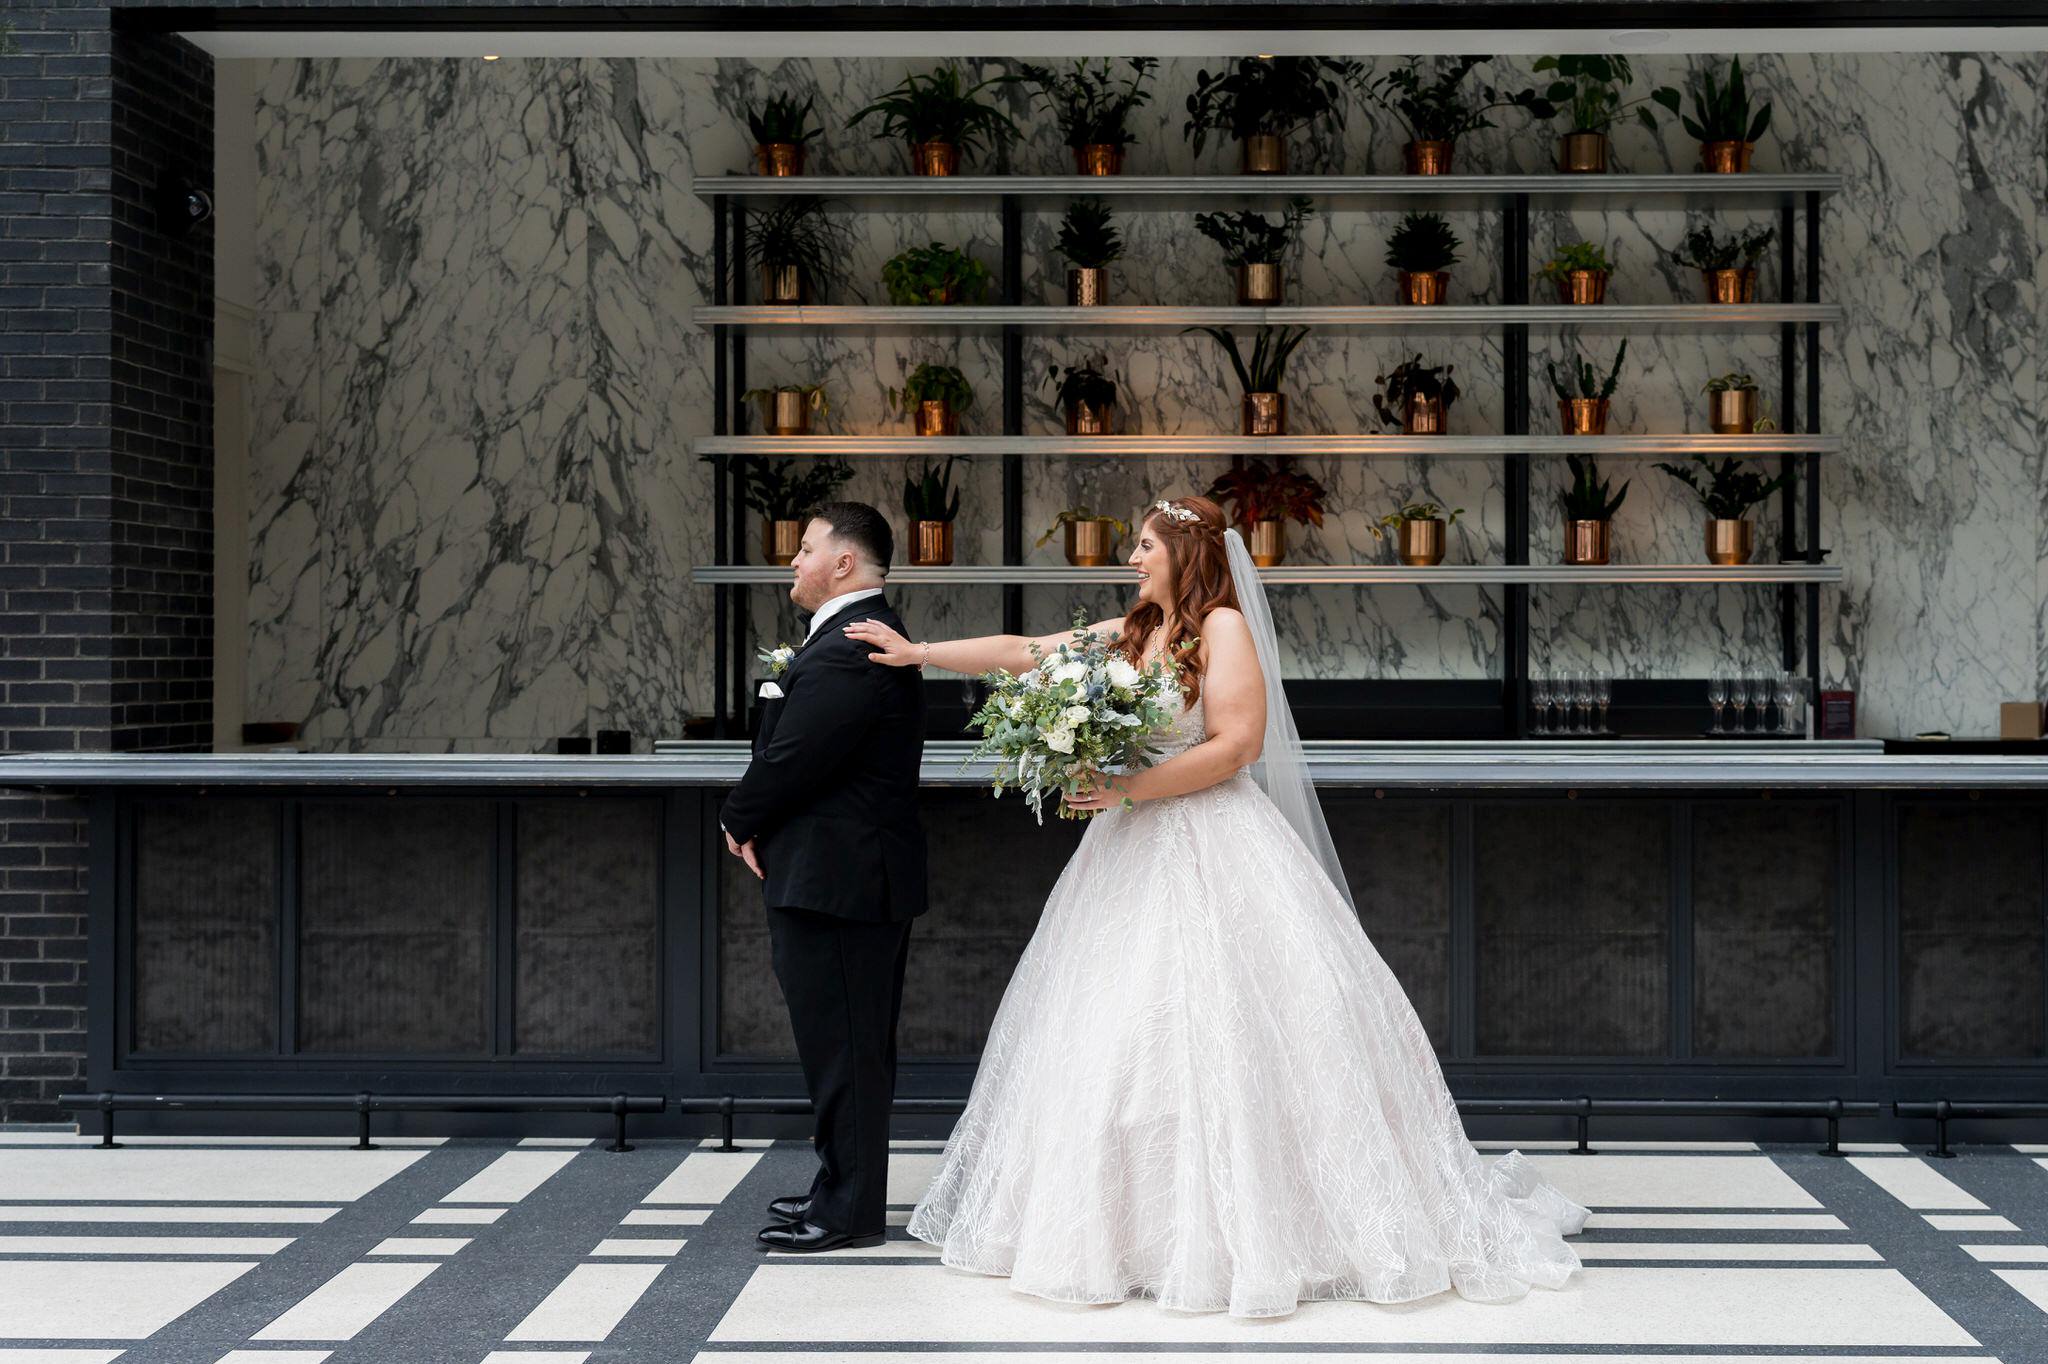 A bride and groom share a first look inside the Shinola Hotel wedding.